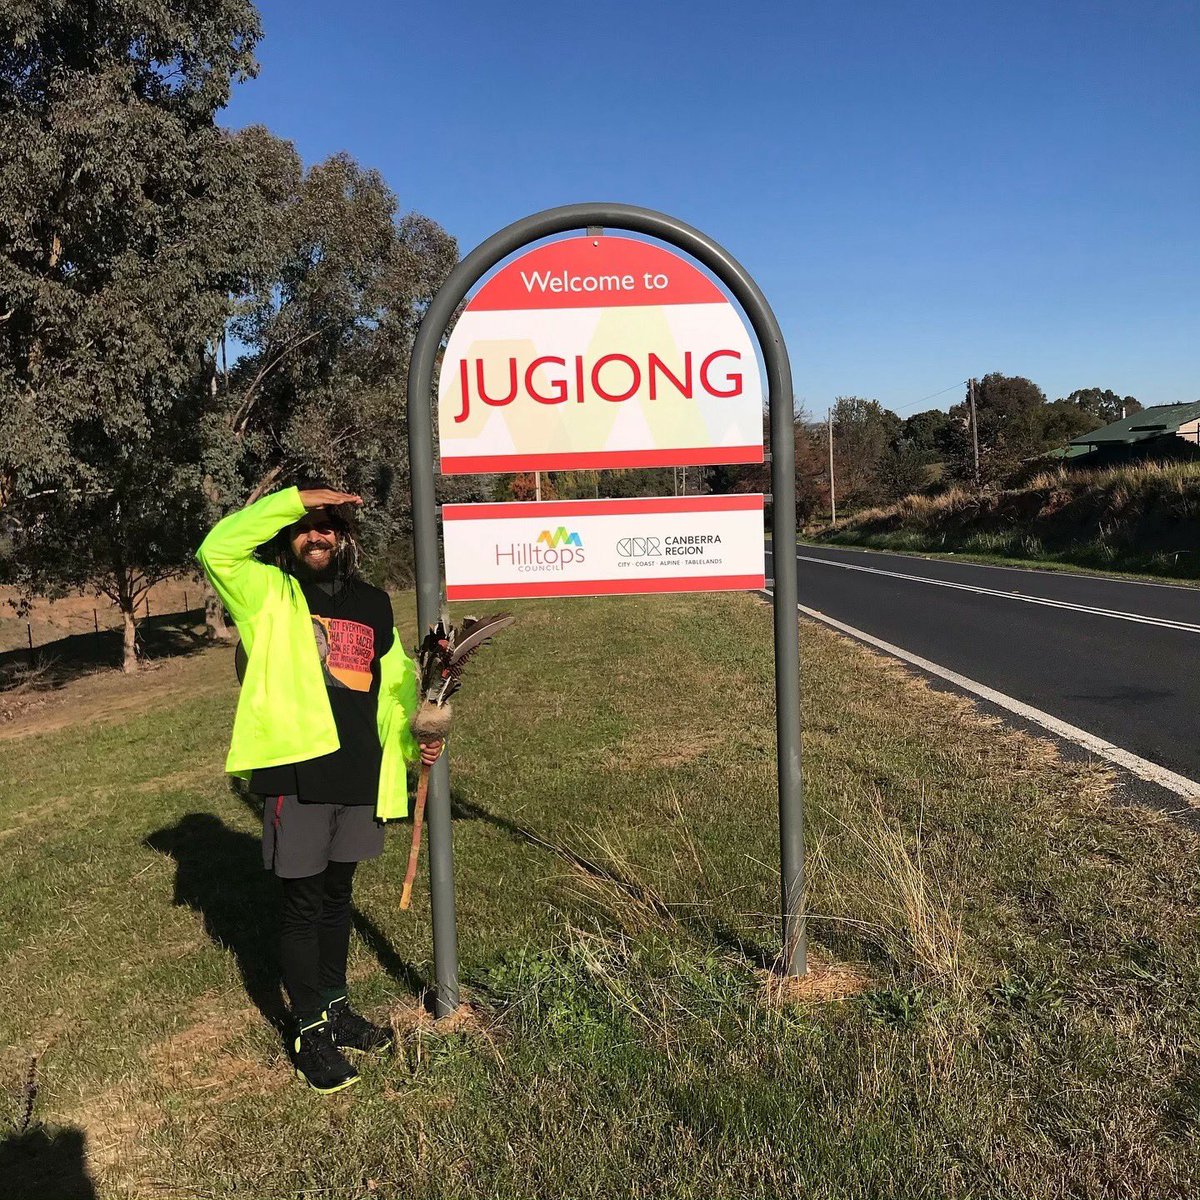 Arrival Jugiong 👣✊🏽slow steady day. Got a few more blisters today. Sign says I’m in the Canberra region woo hoo not far now you mob heyhay 
.
.
#messagestickwalk #jugiong #nsw #walking #canberraregion #24kms #moreblisters